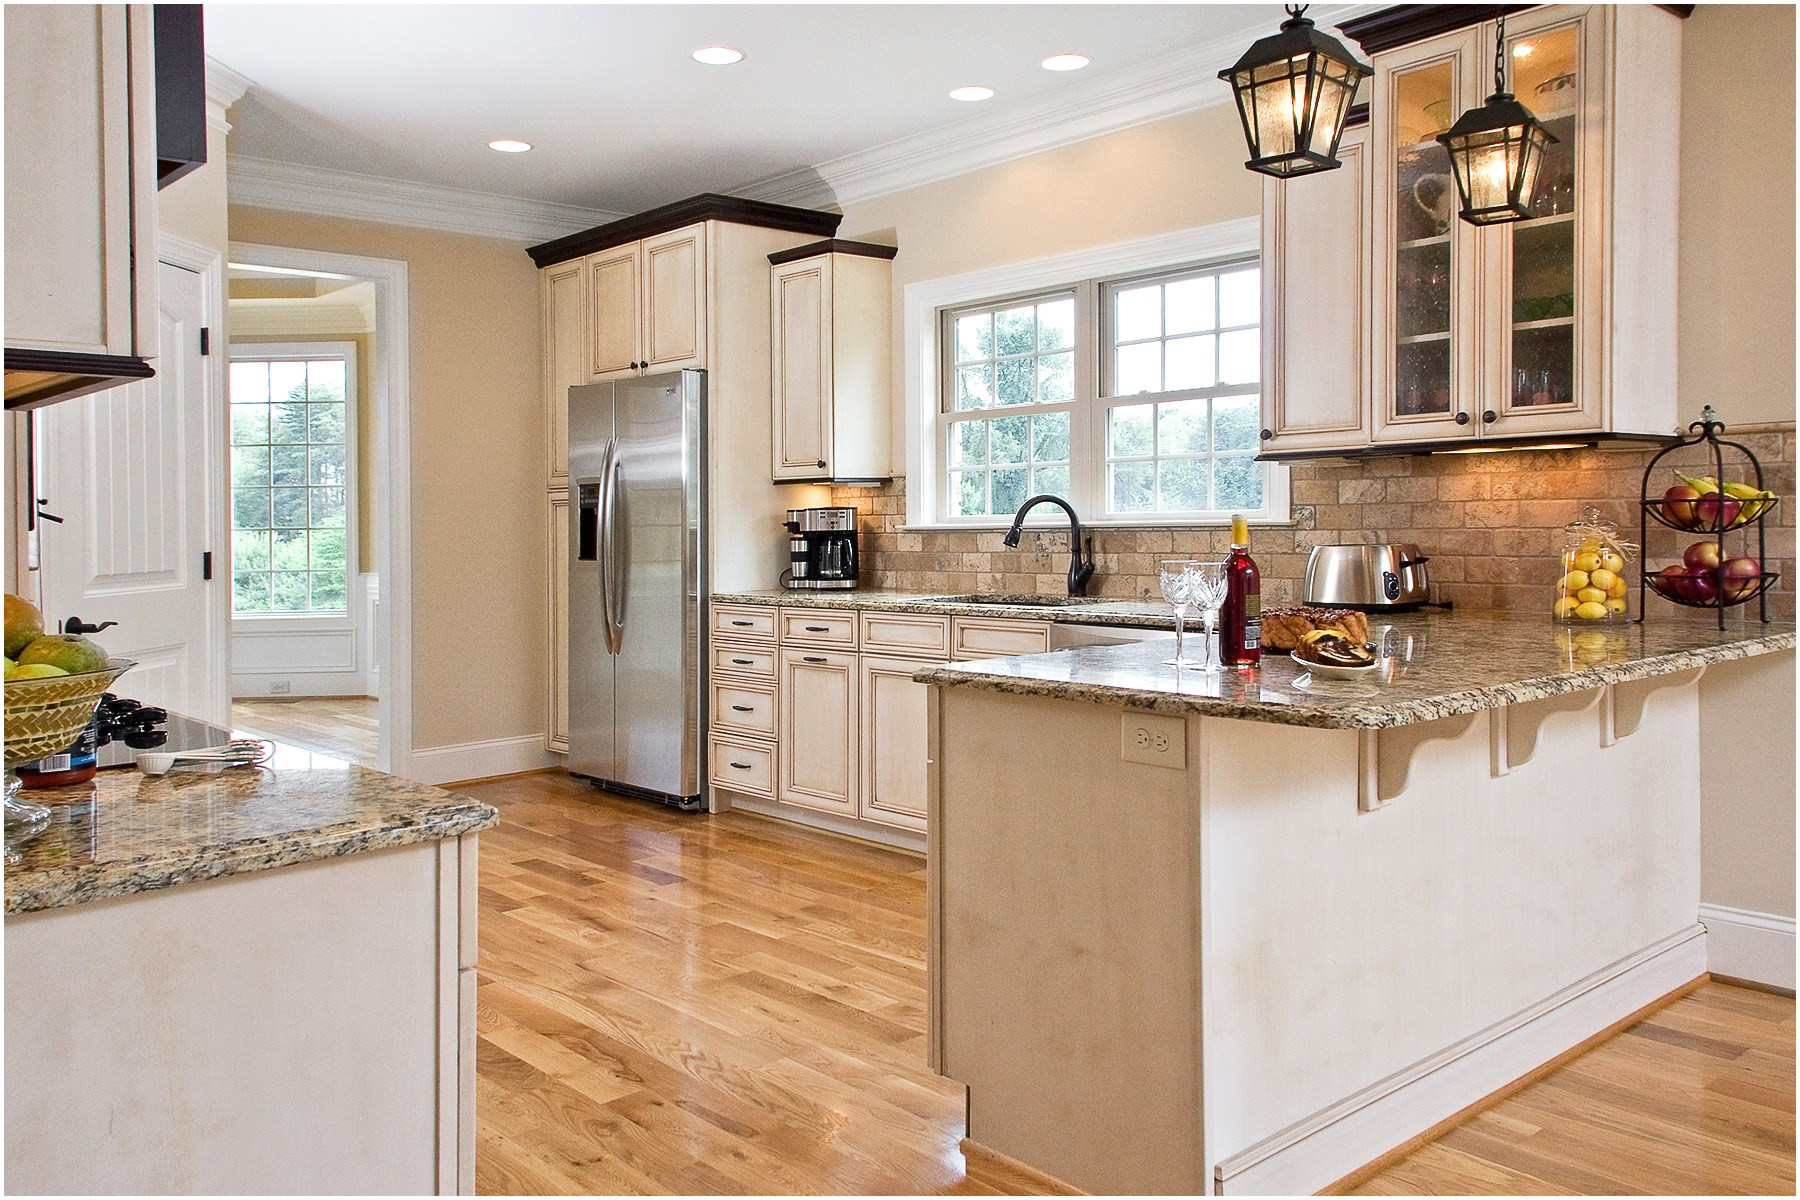 Thomasville Kitchen Cabinets Outlet 25 Fresh Thomasville Kitchen Cabinets Outlet Kitchen Cabinet